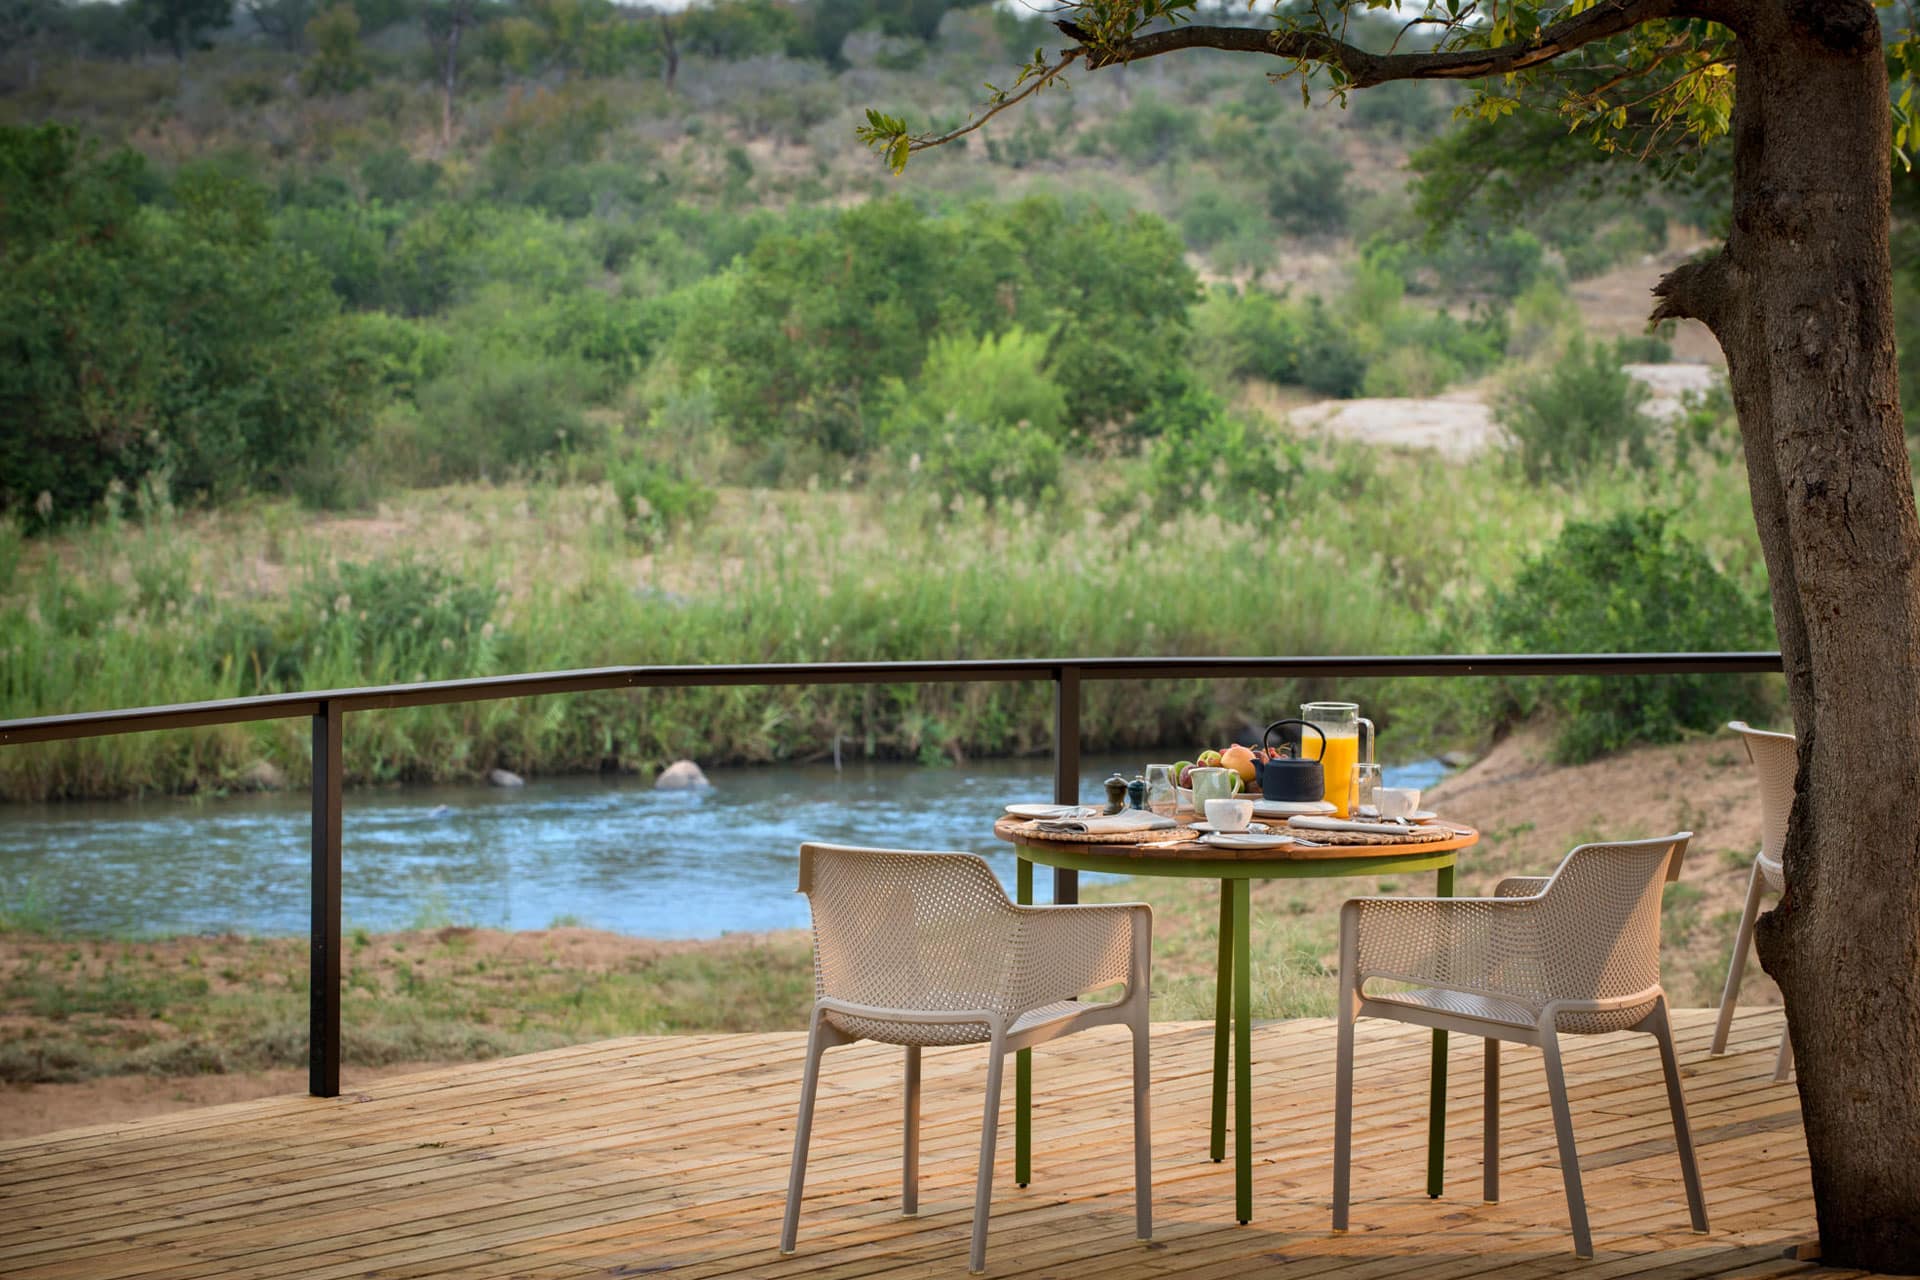 A breakfast table set up on a wooden deck overlooking the river at Lion Sands River Lodge in Lion Sands Game Reserve.